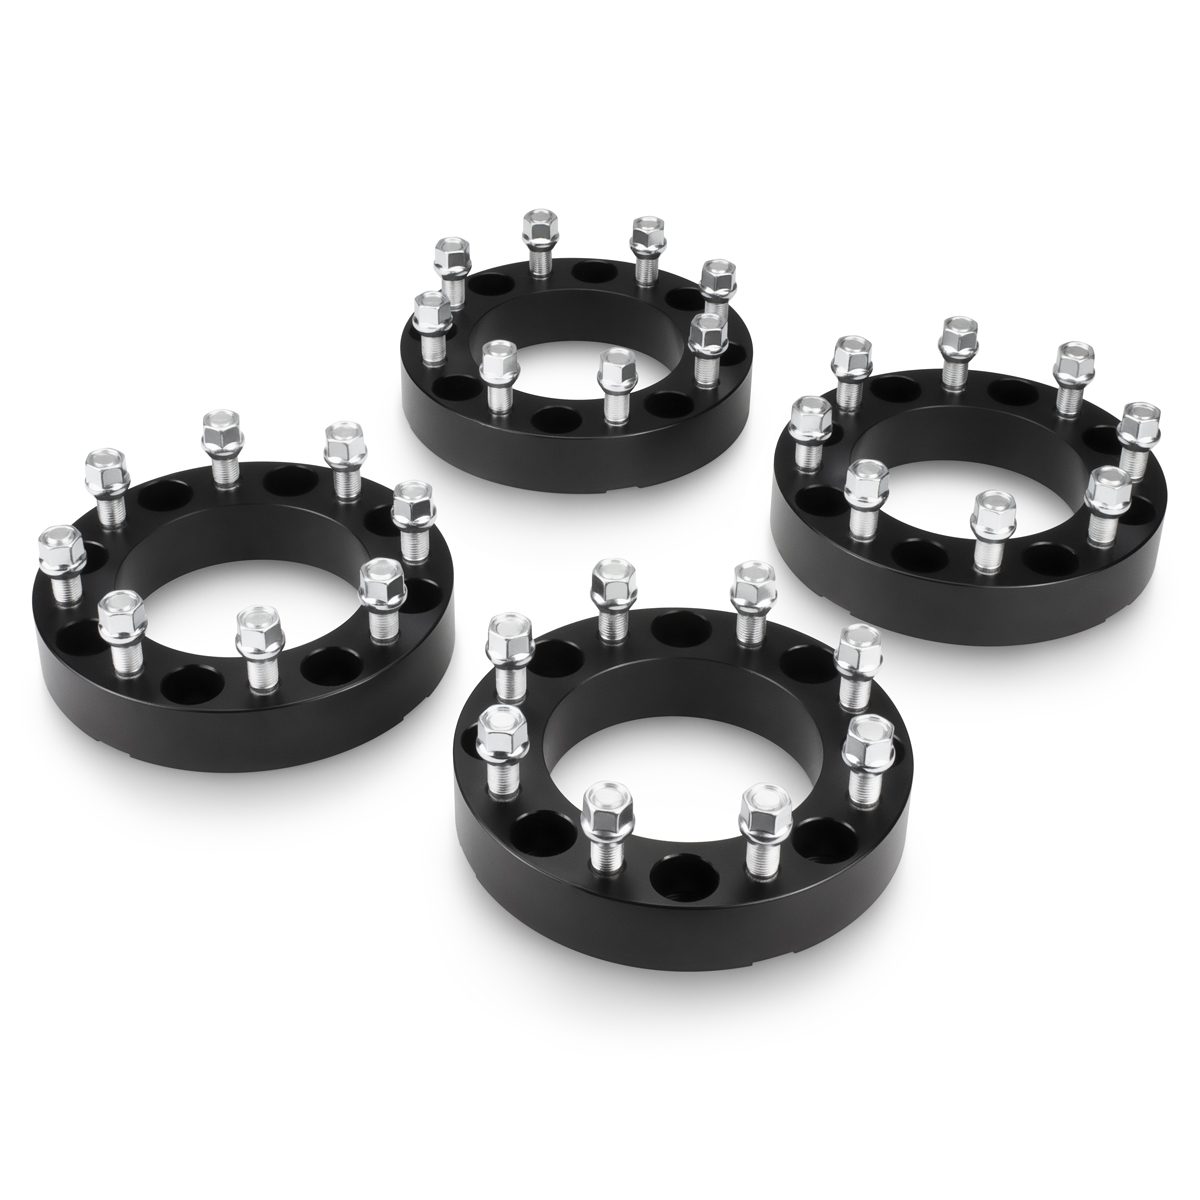 130mm Center Bore 1.5 Wheel Spacers for 2010-2014 Dodge Ram 2500 2wd//4wd Supreme Suspensions - 9//16 x 18 Stud Size 8x6.5 Bolt Pattern Black 4X